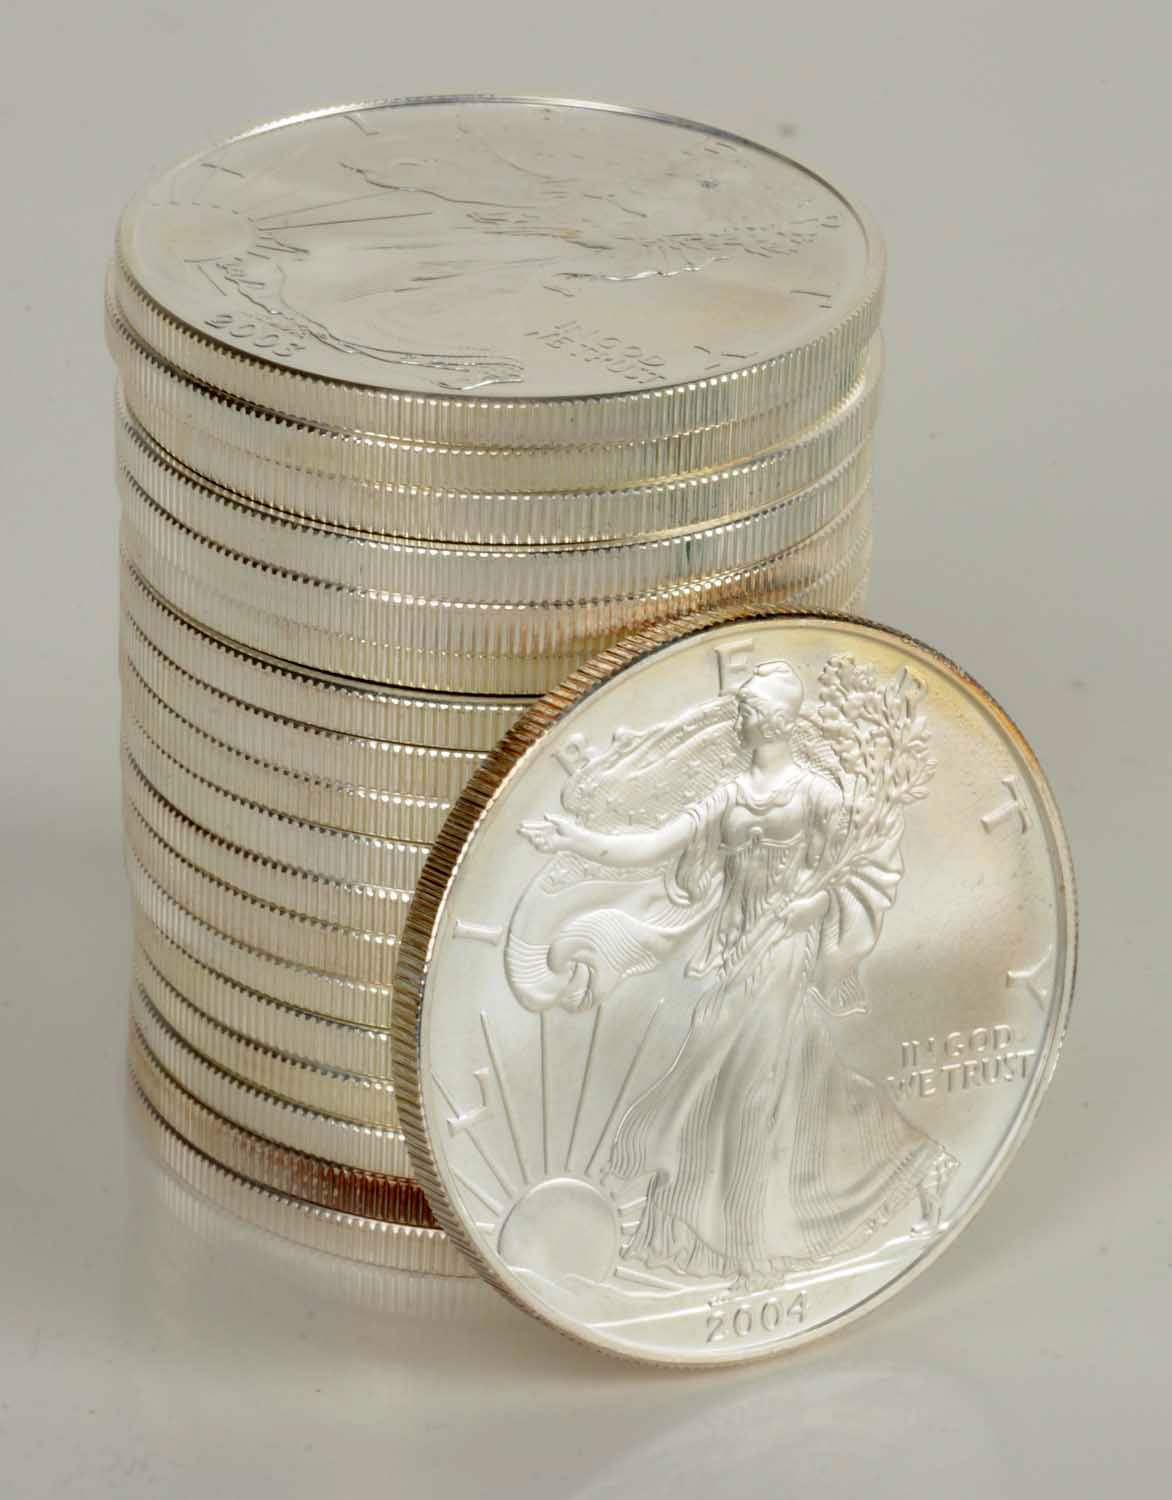 Roll of 20 American Silver Dollar Eagles, Estimated at $350-450.